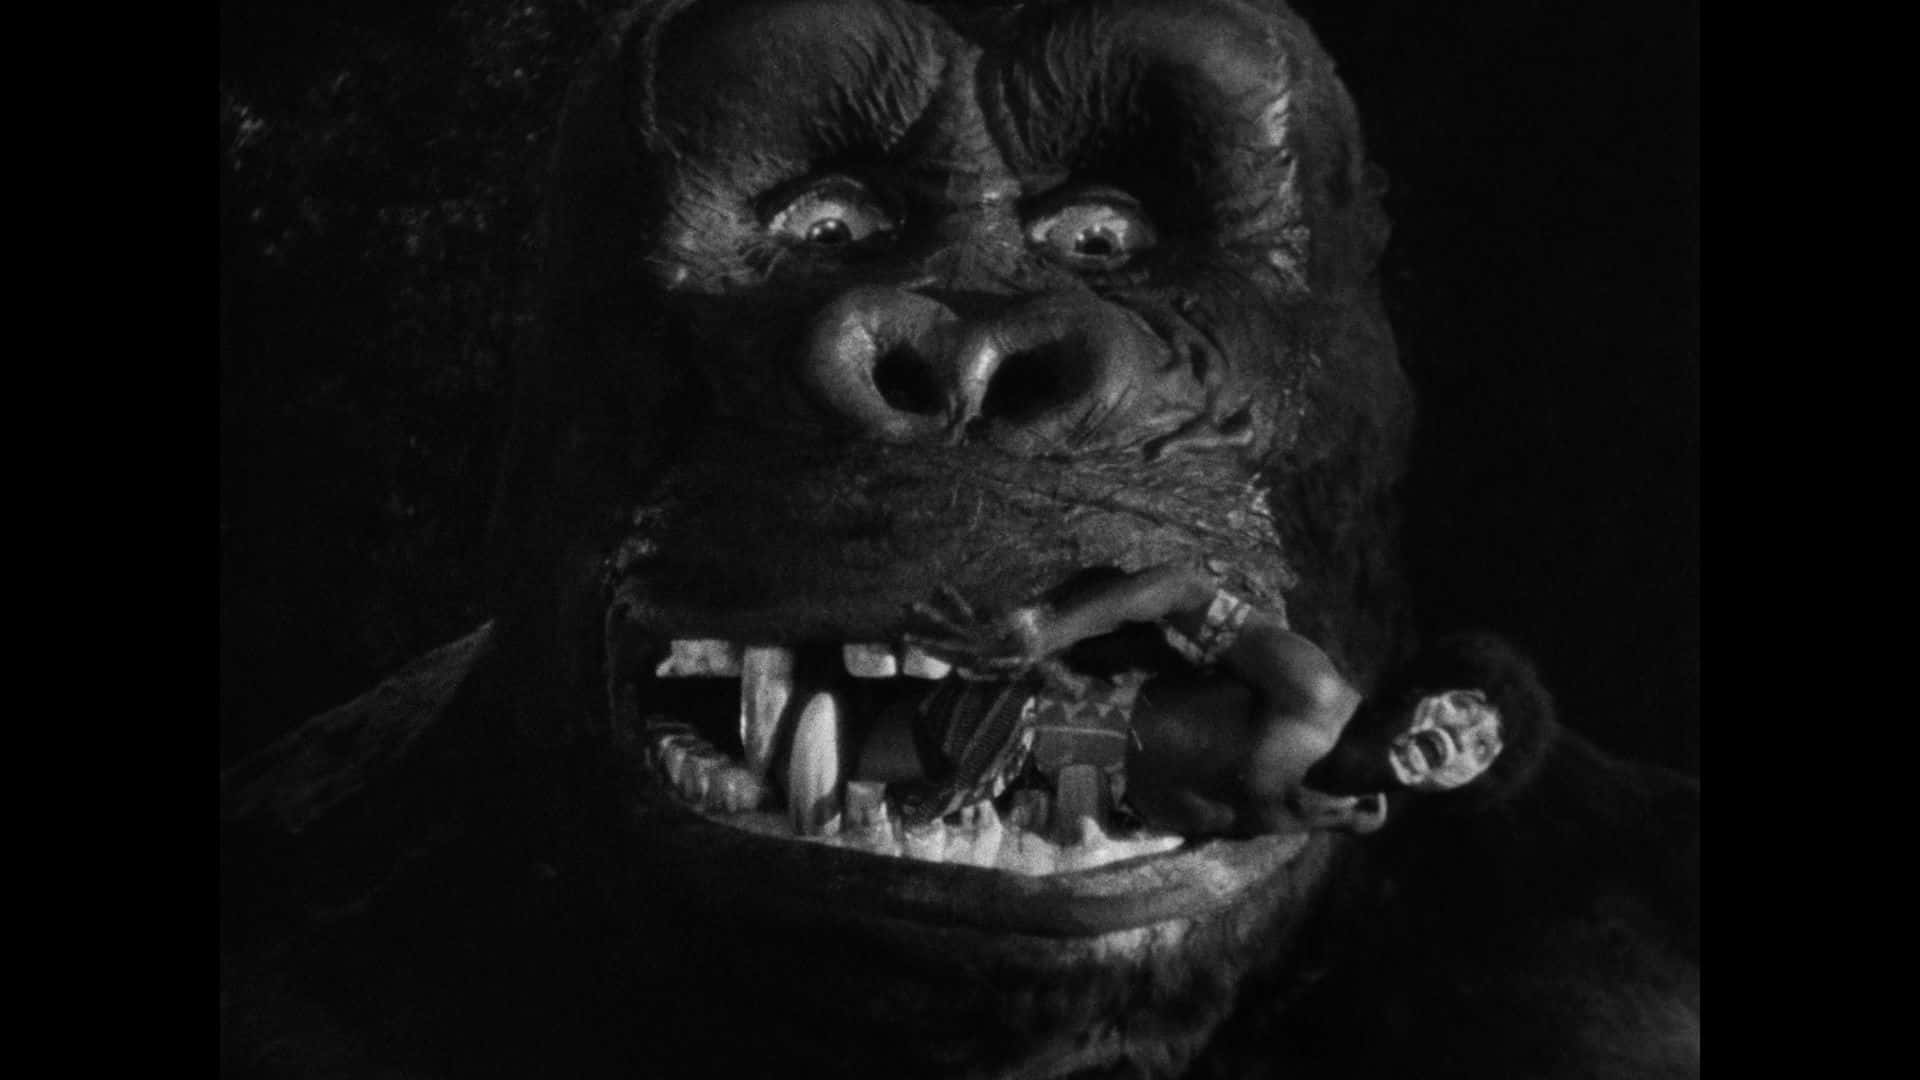 A Gorilla With His Mouth Open Is Shown In This Black And White Photo